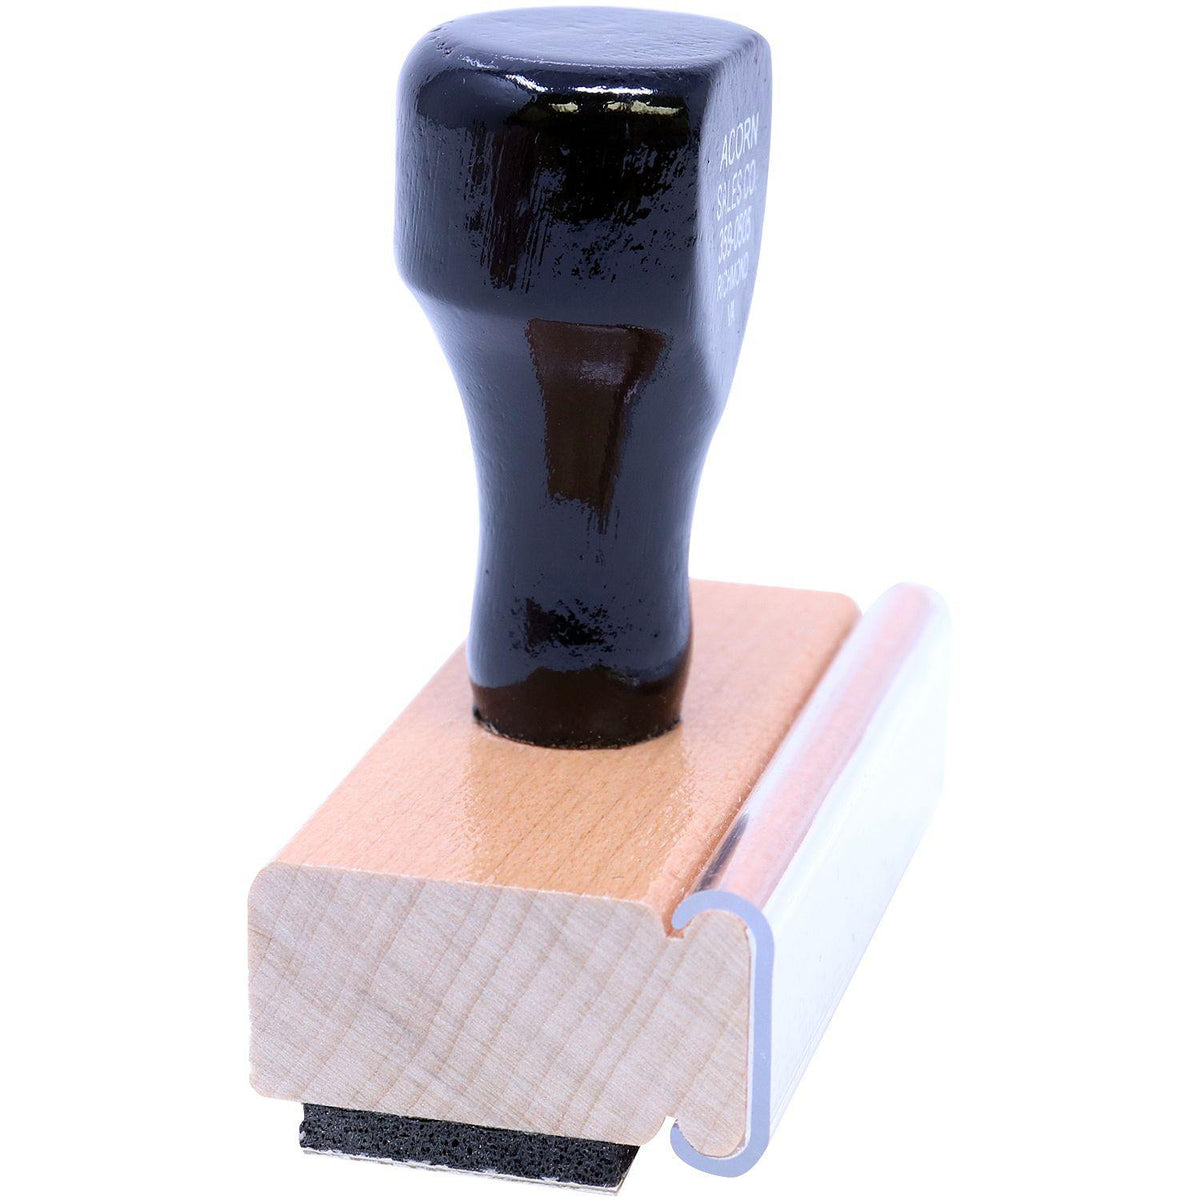 Side View of Large Parent Signature Required Rubber Stamp at an Angle